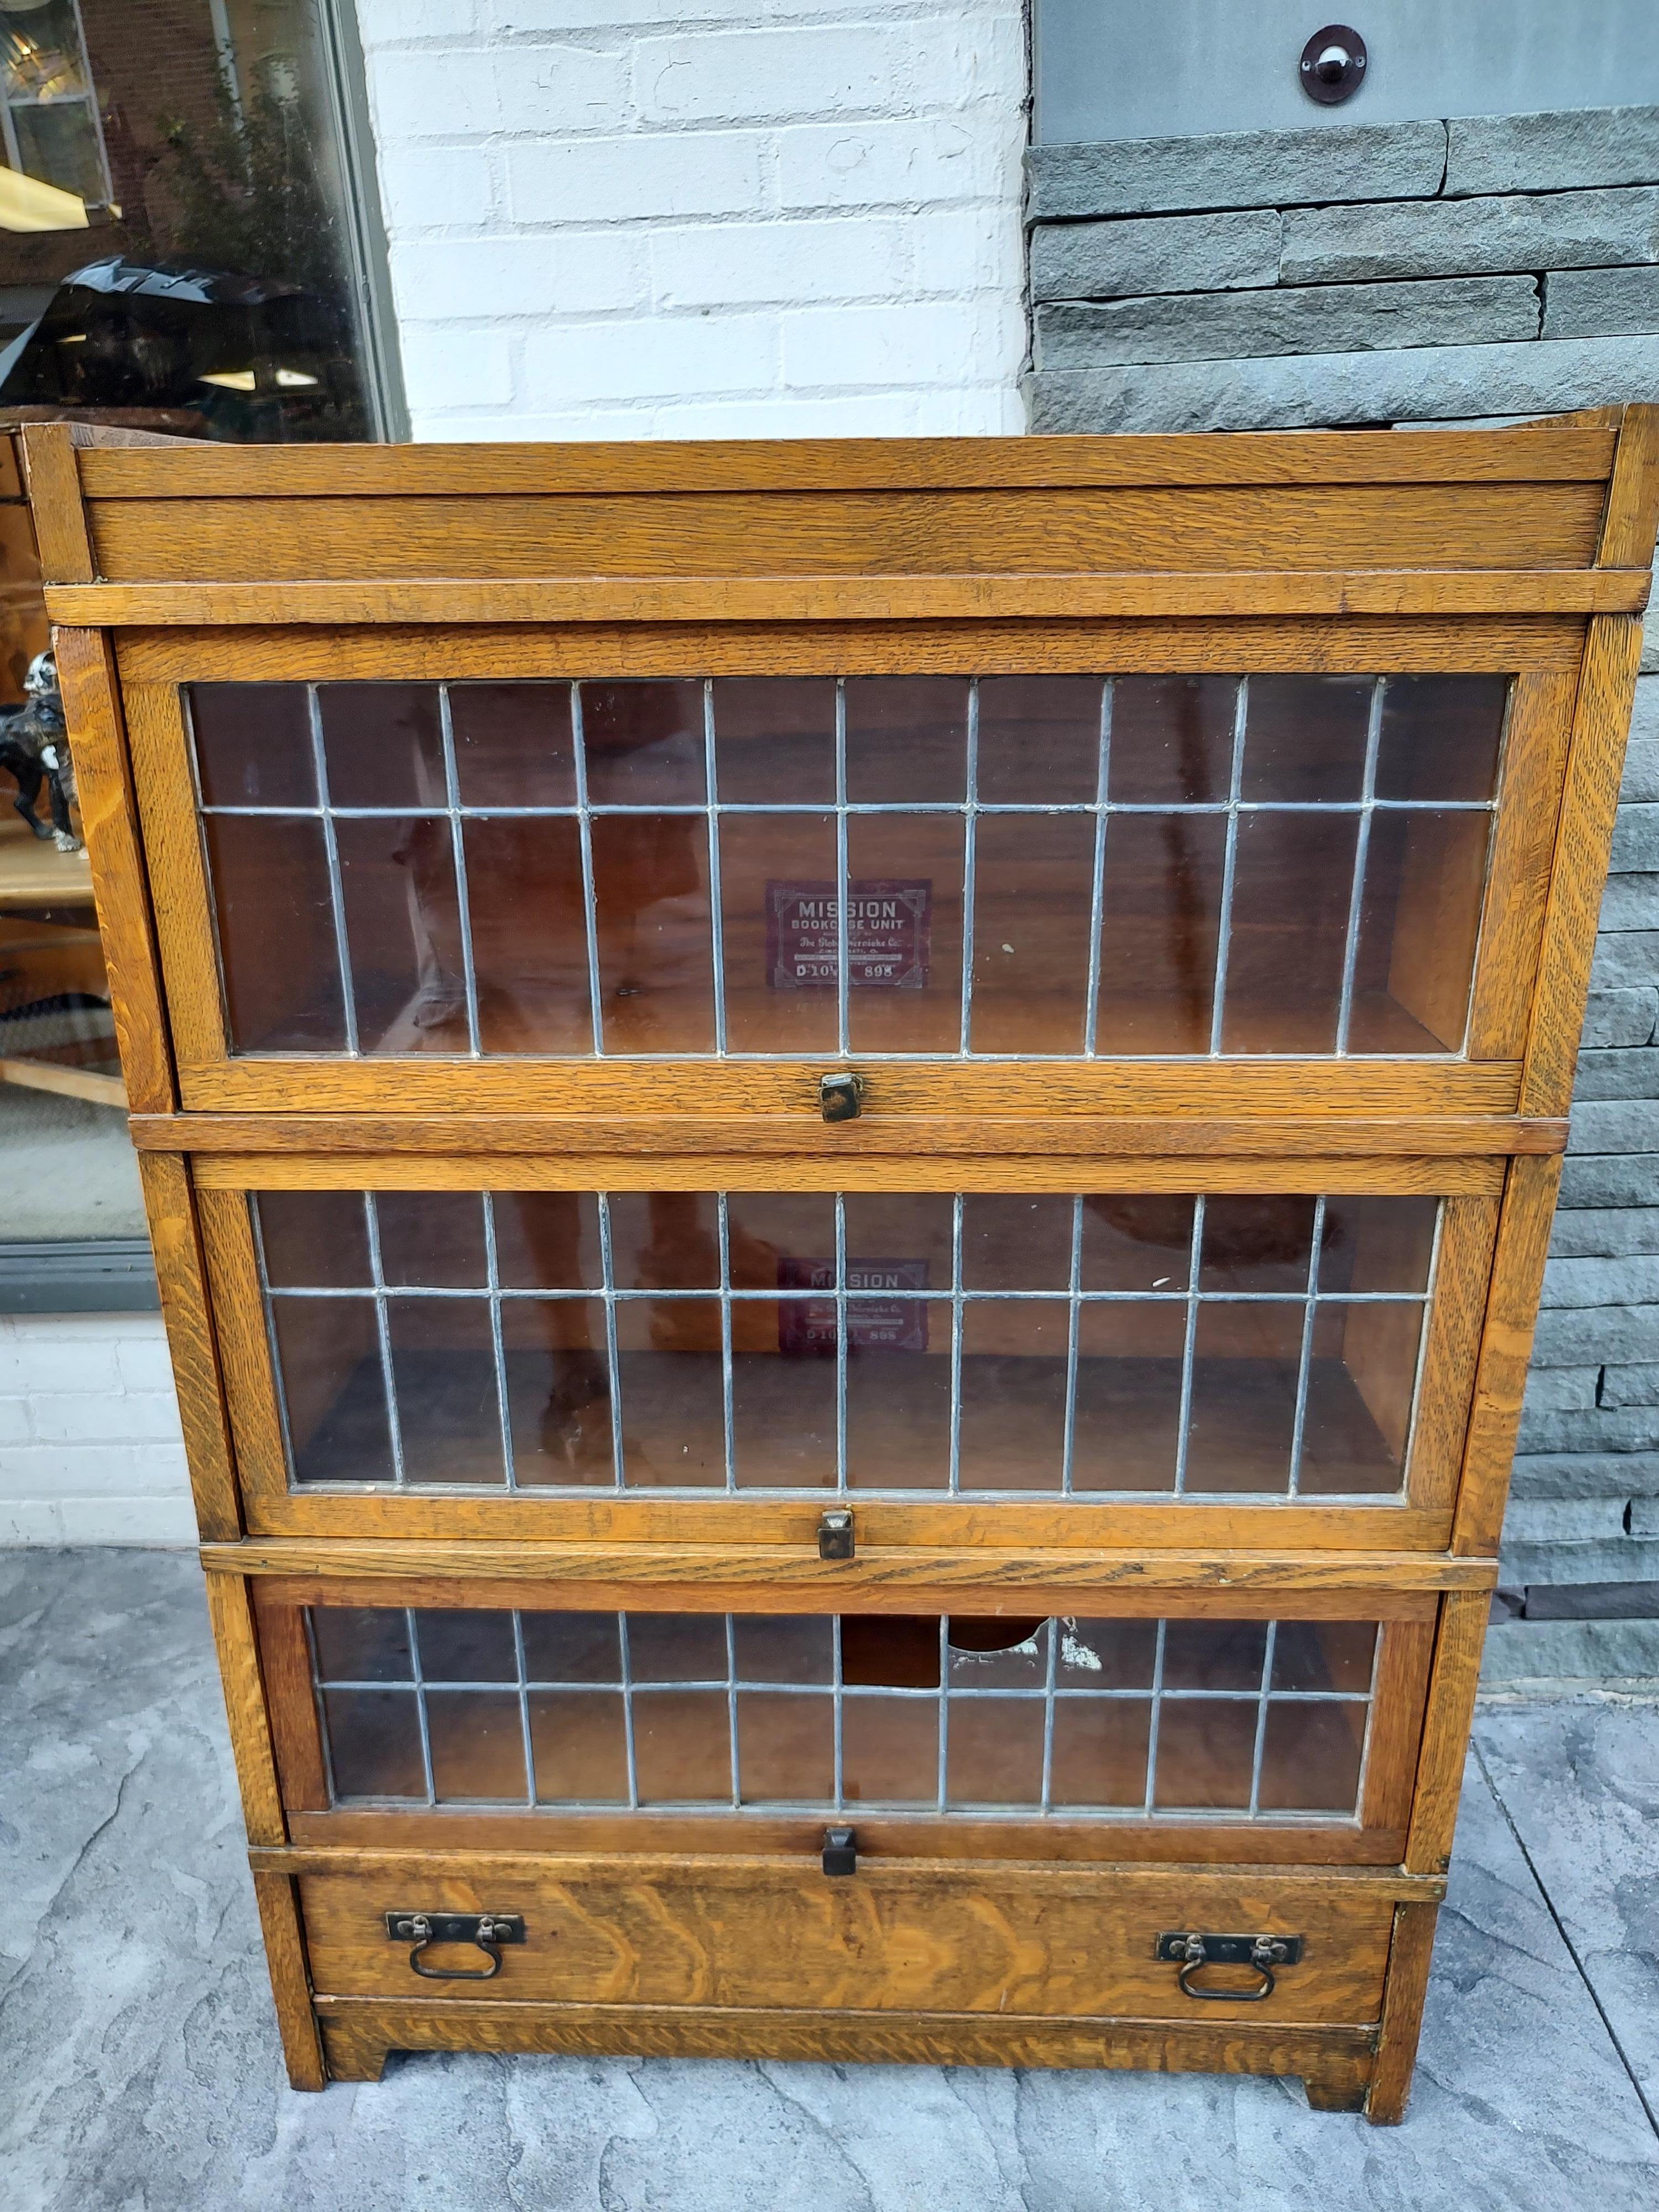 Fabulous arts & crafts mission bookcase with 5 sections, 3 leaded glass door compartments which have storage space. Sizes are, 32x 9.5x 10h, 32x 9.5 x 10.5h, 32 x 9.5 x 8.75h. Drawer at the base and top cap complete the set. Made from quarter sawn